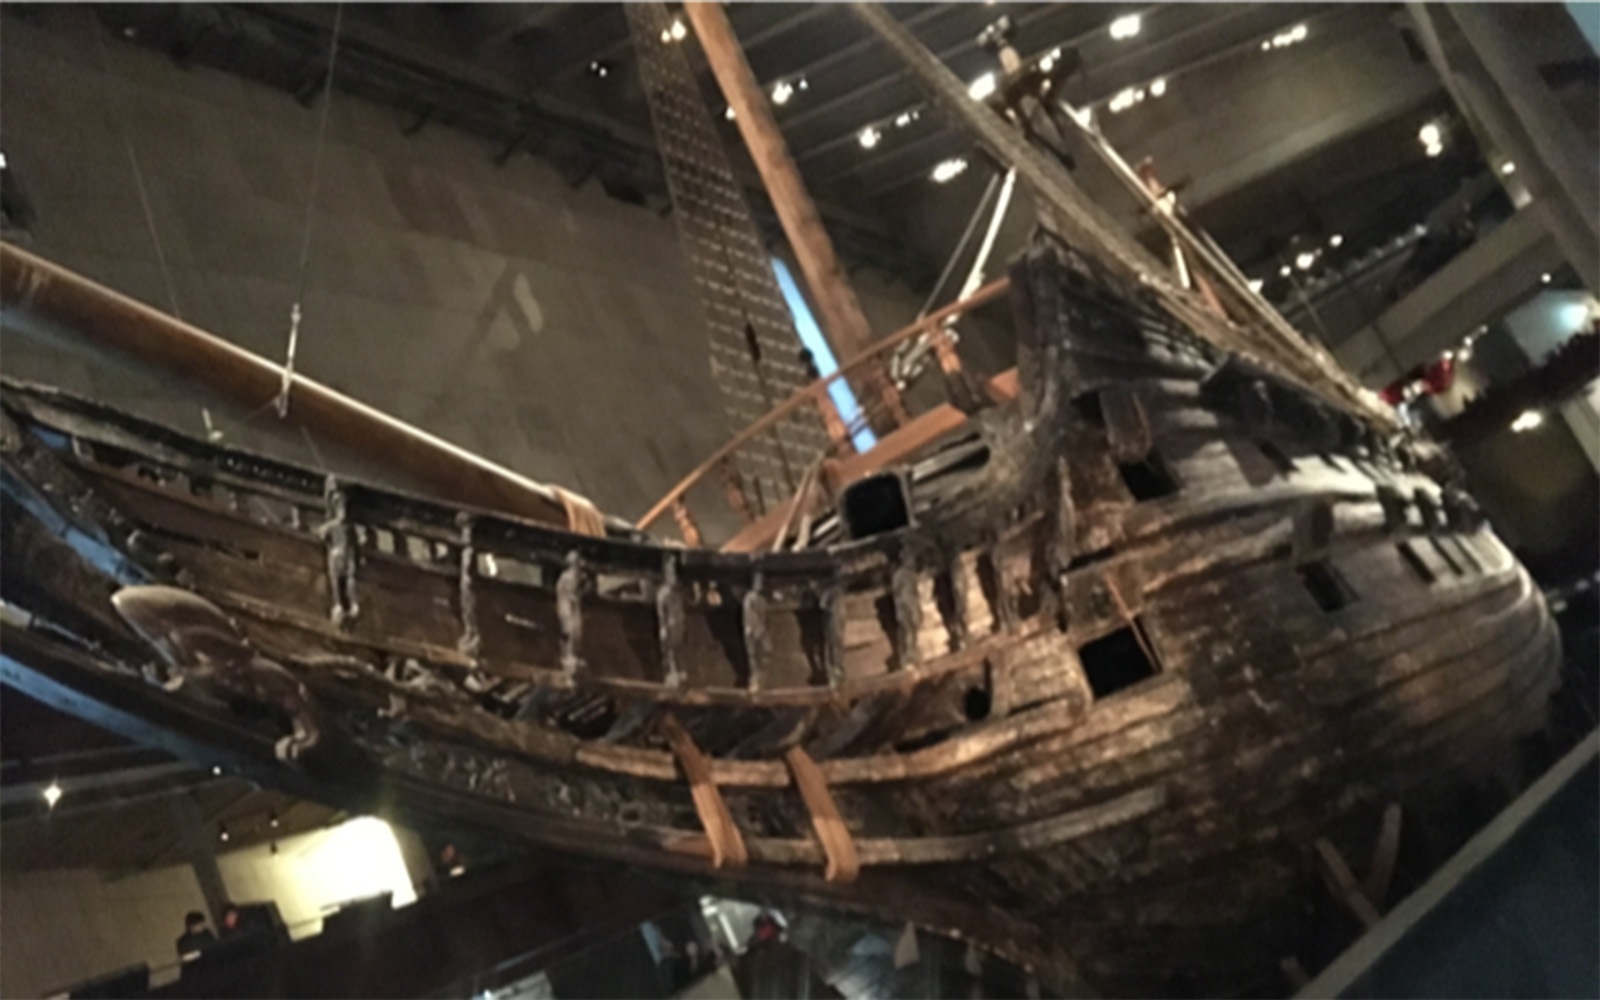 Vasa, the world's only preserved 17th century ship (Brendan Mulcahey/UConn School of Business)